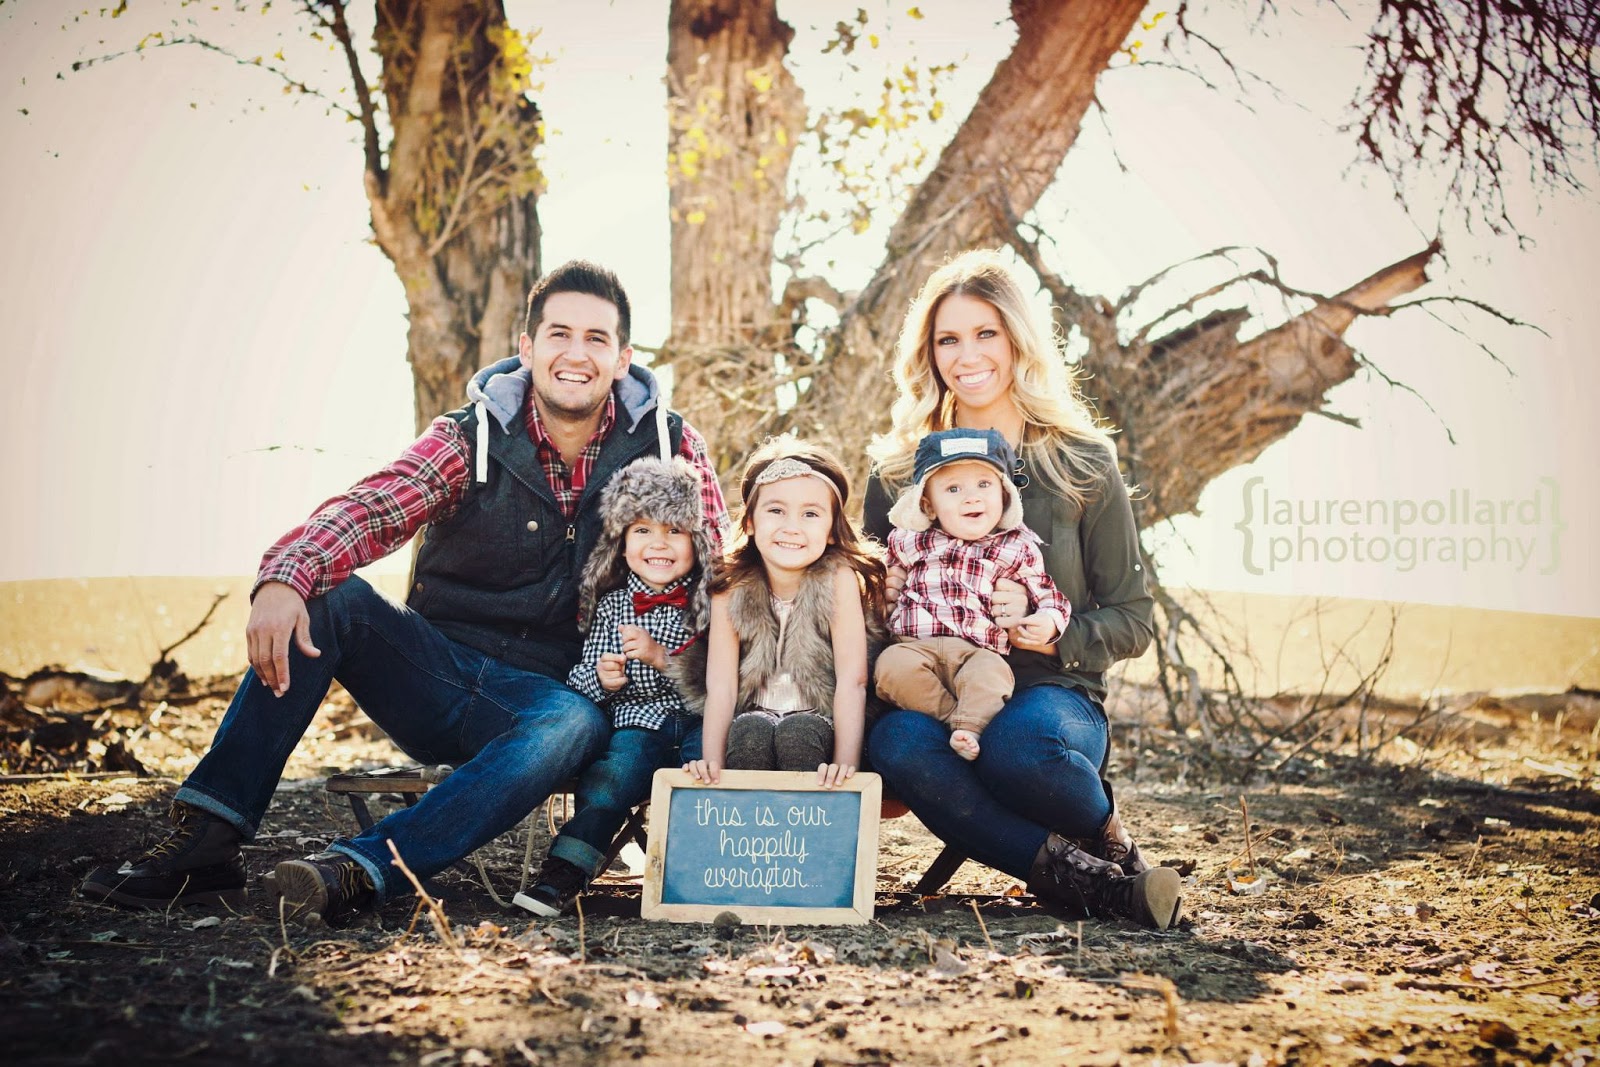 Fawn Over Baby: Family Photo Session By Lauren Pollard Photography